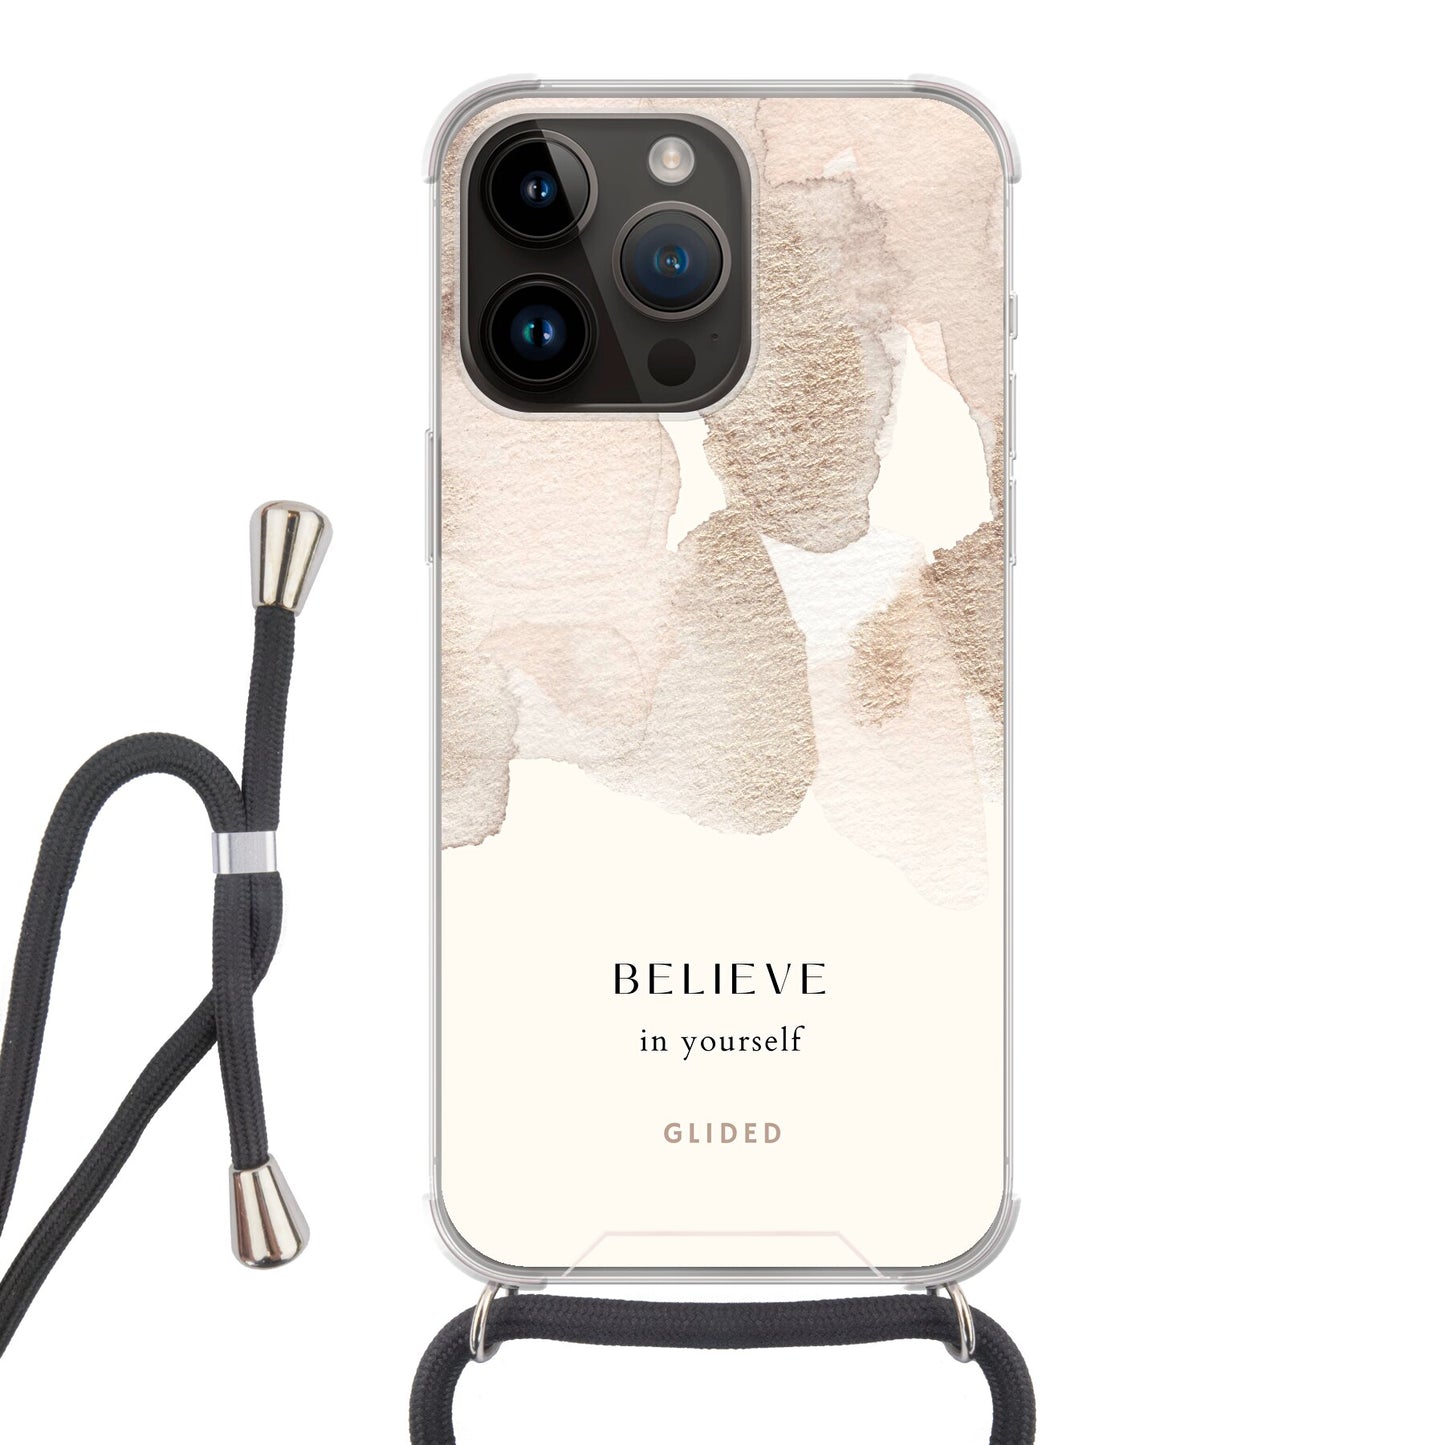 Believe in yourself - iPhone 14 Pro Max Handyhülle Crossbody case mit Band